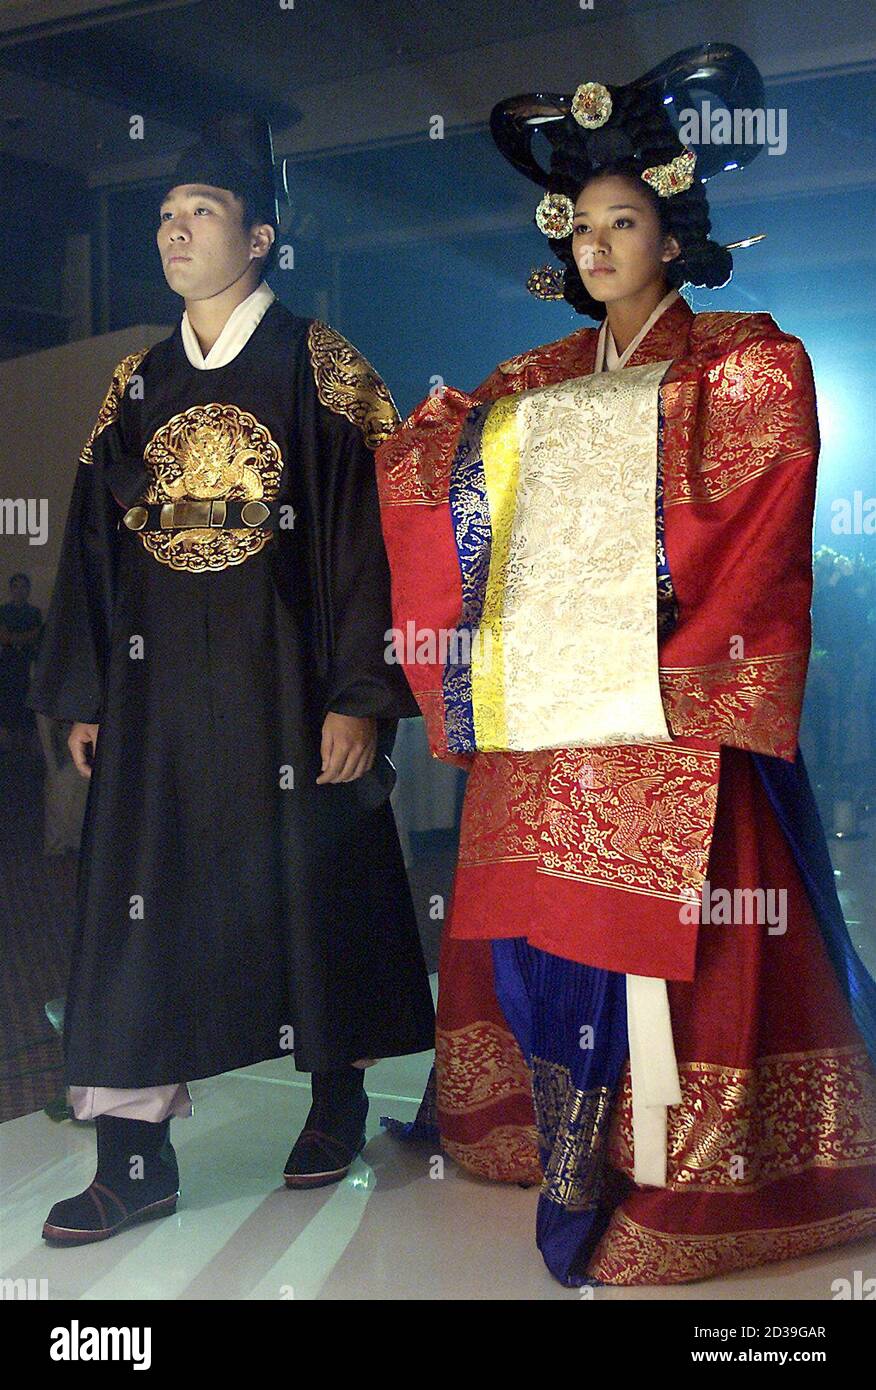 South Korean models present Lee Dynasty's royal wedding attire during a  traditional costume "Hanbok" fashion show in Seoul August 20, 2001. YUN/CP  Stock Photo - Alamy